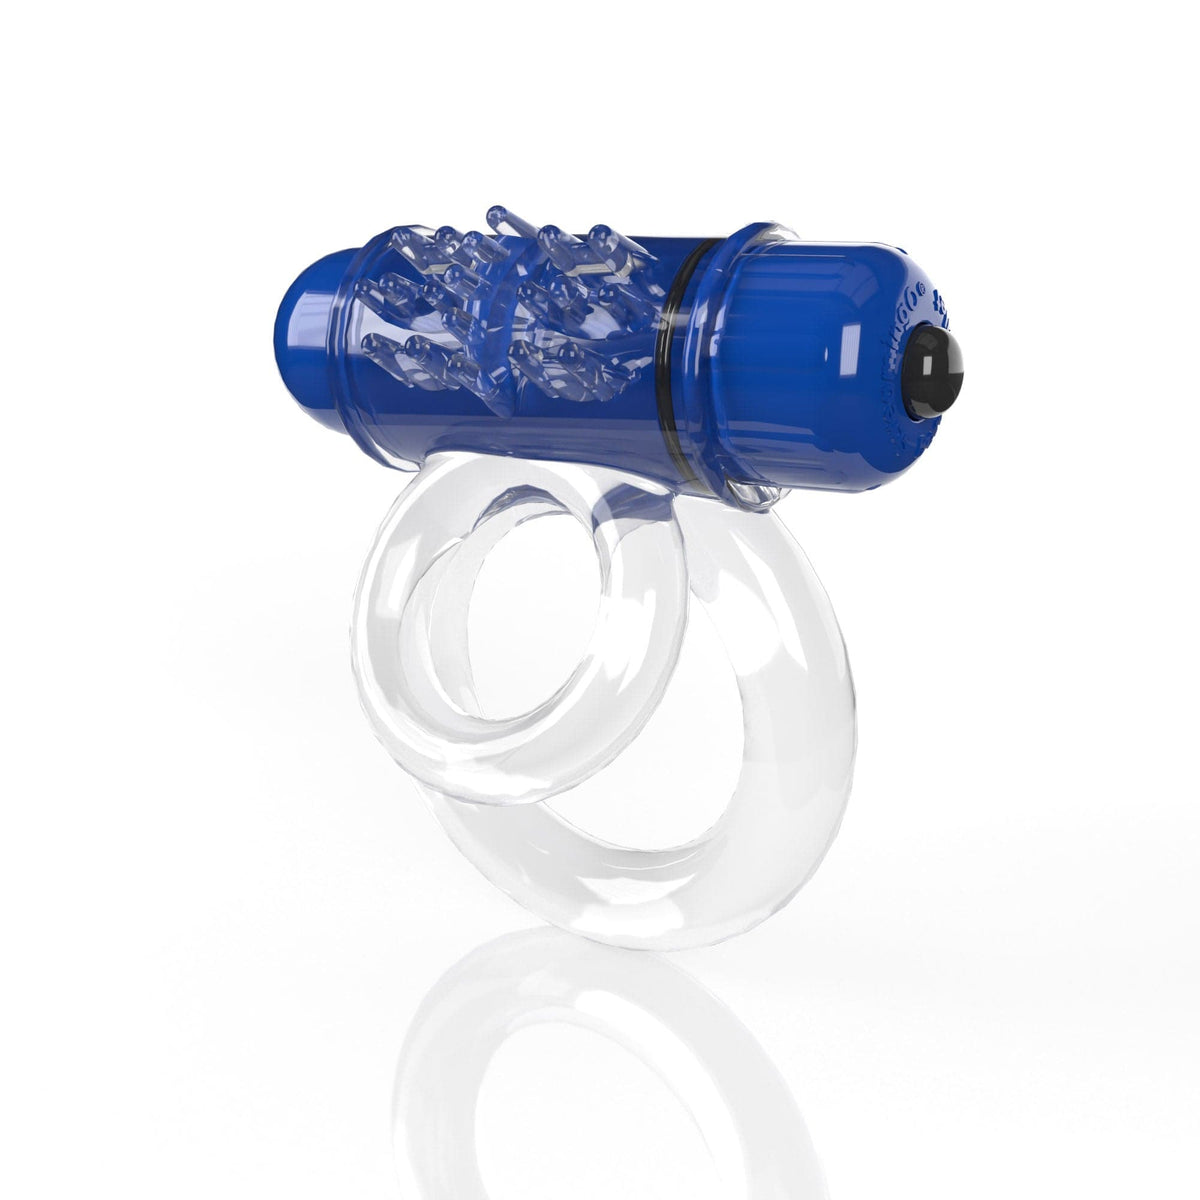 screaming o 4b double o super powered vibrating double ring blueberry